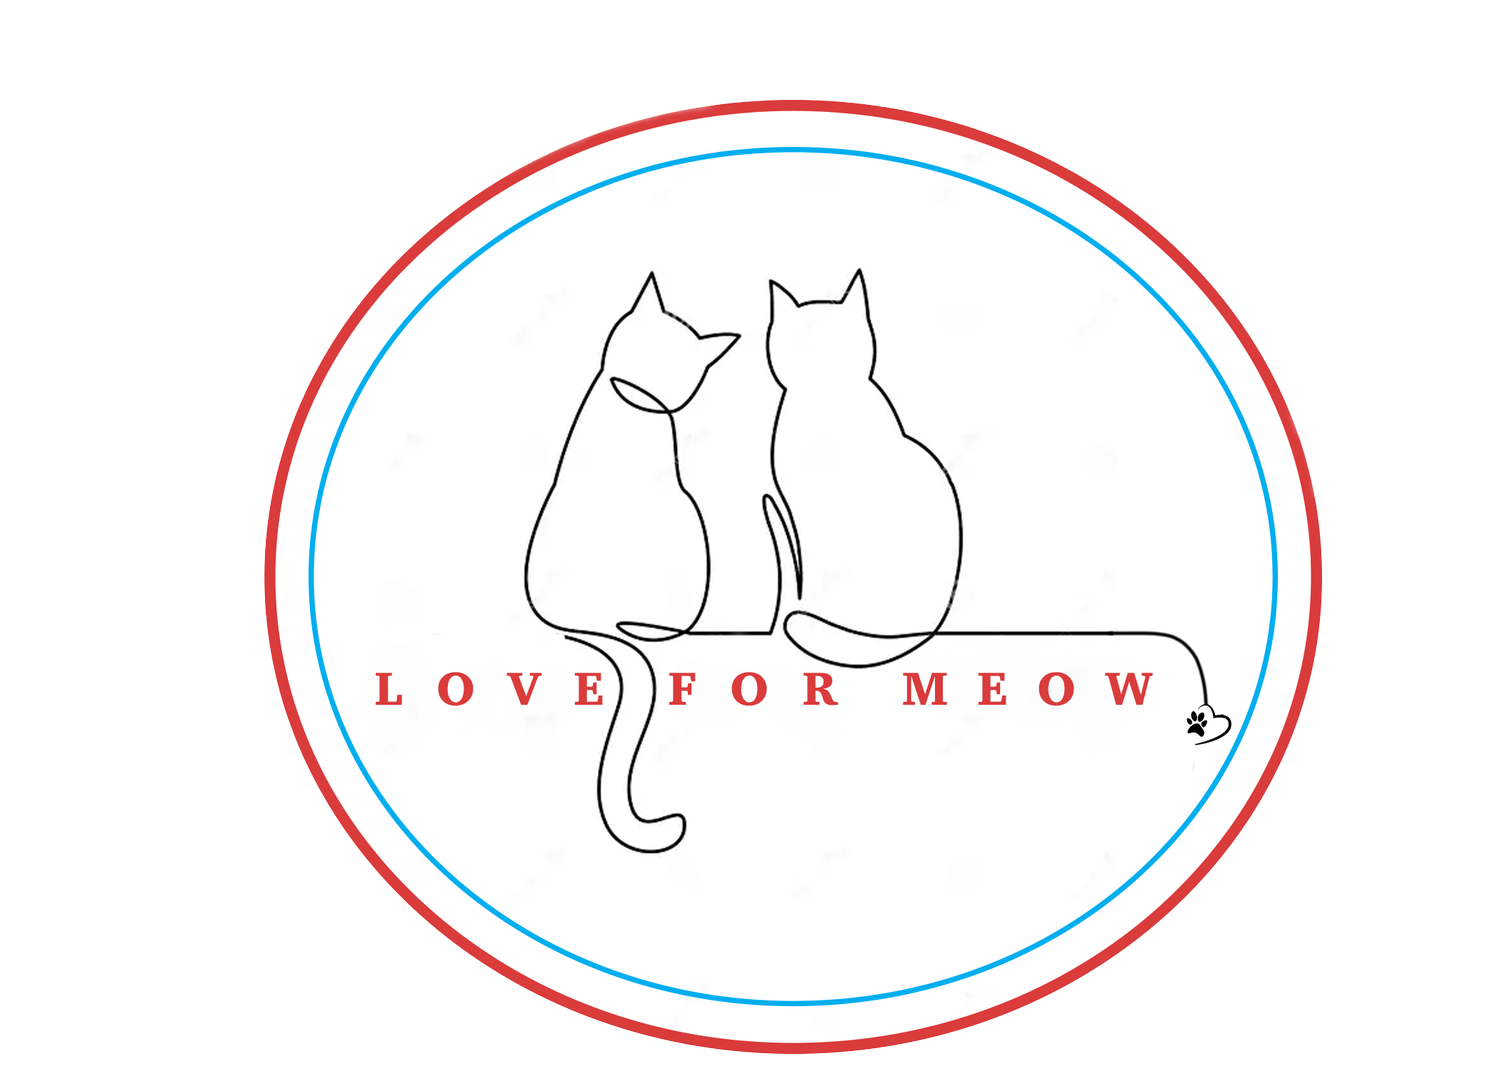 Love For Meow